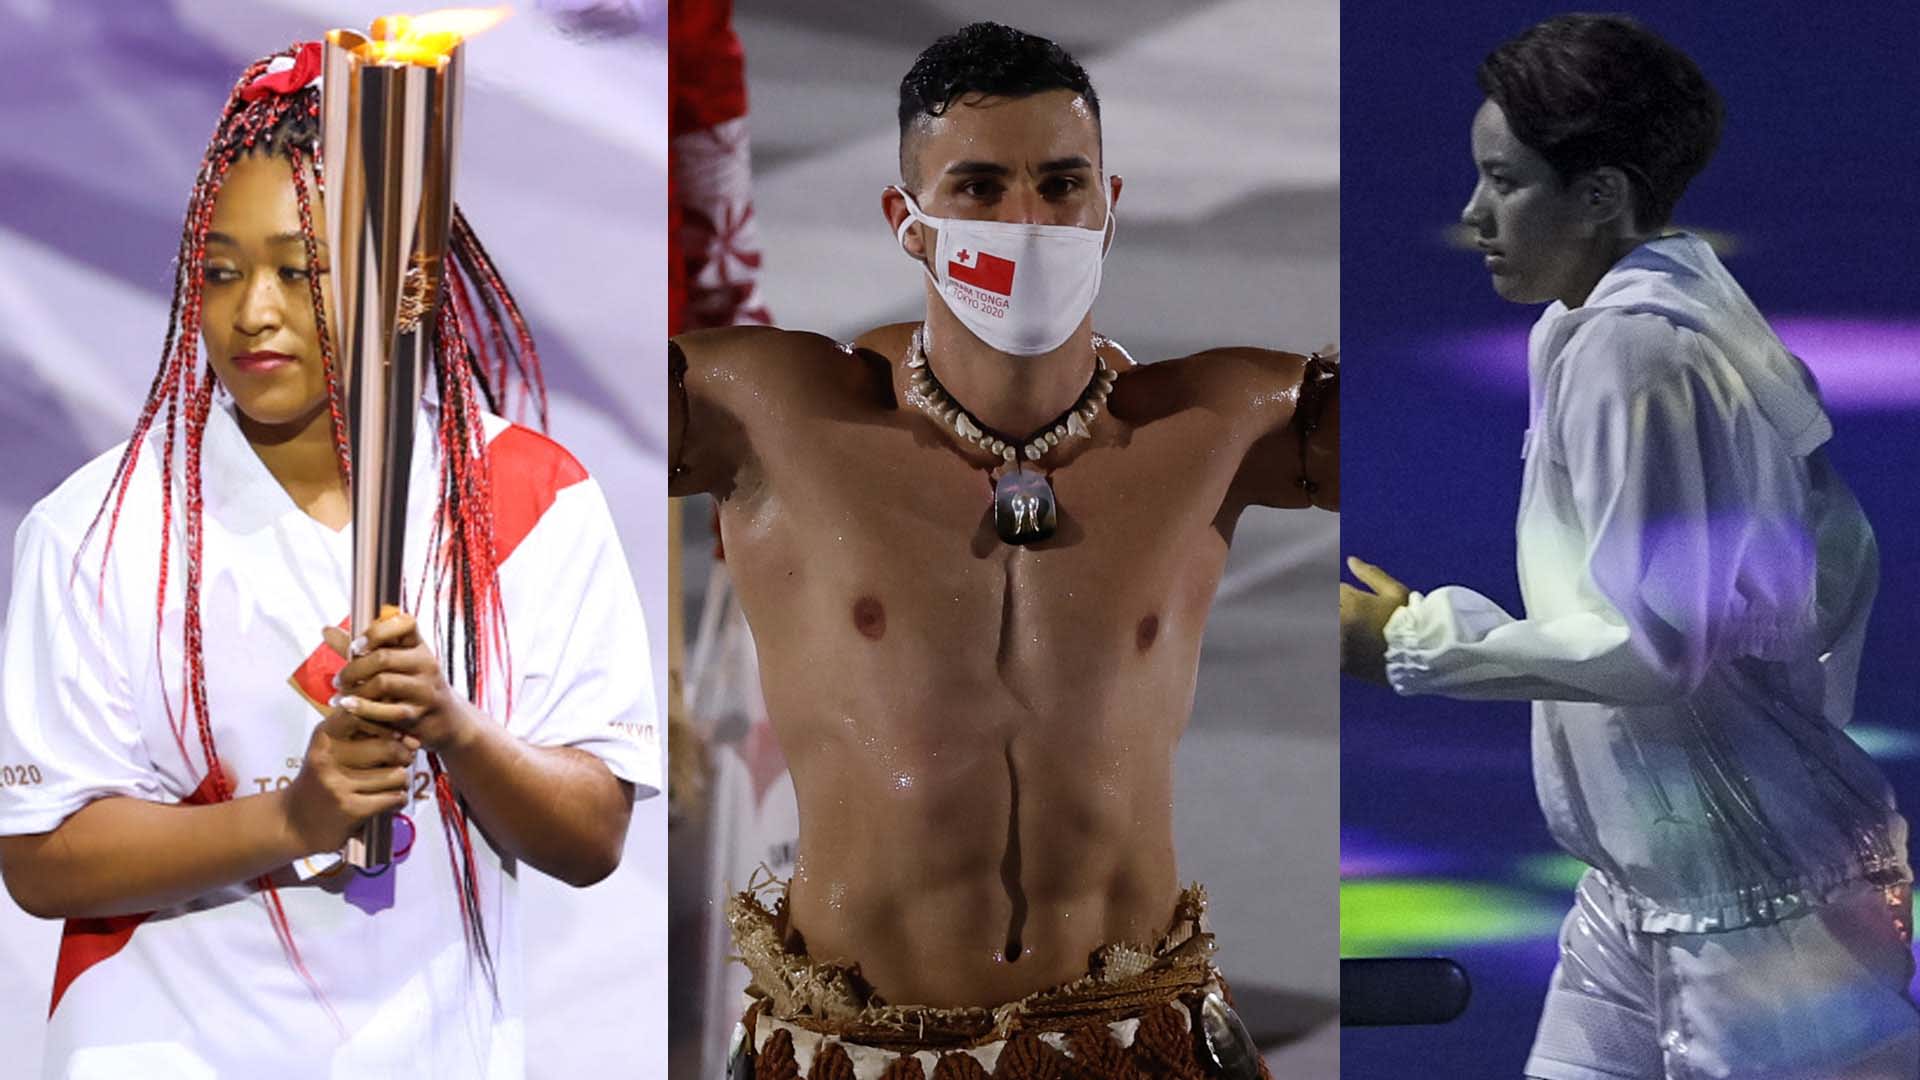 From Treadmill Girl to Tonga's Shirtless Flag Bearer: Memes Inspired By Tokyo 2020's Opening Ceremony